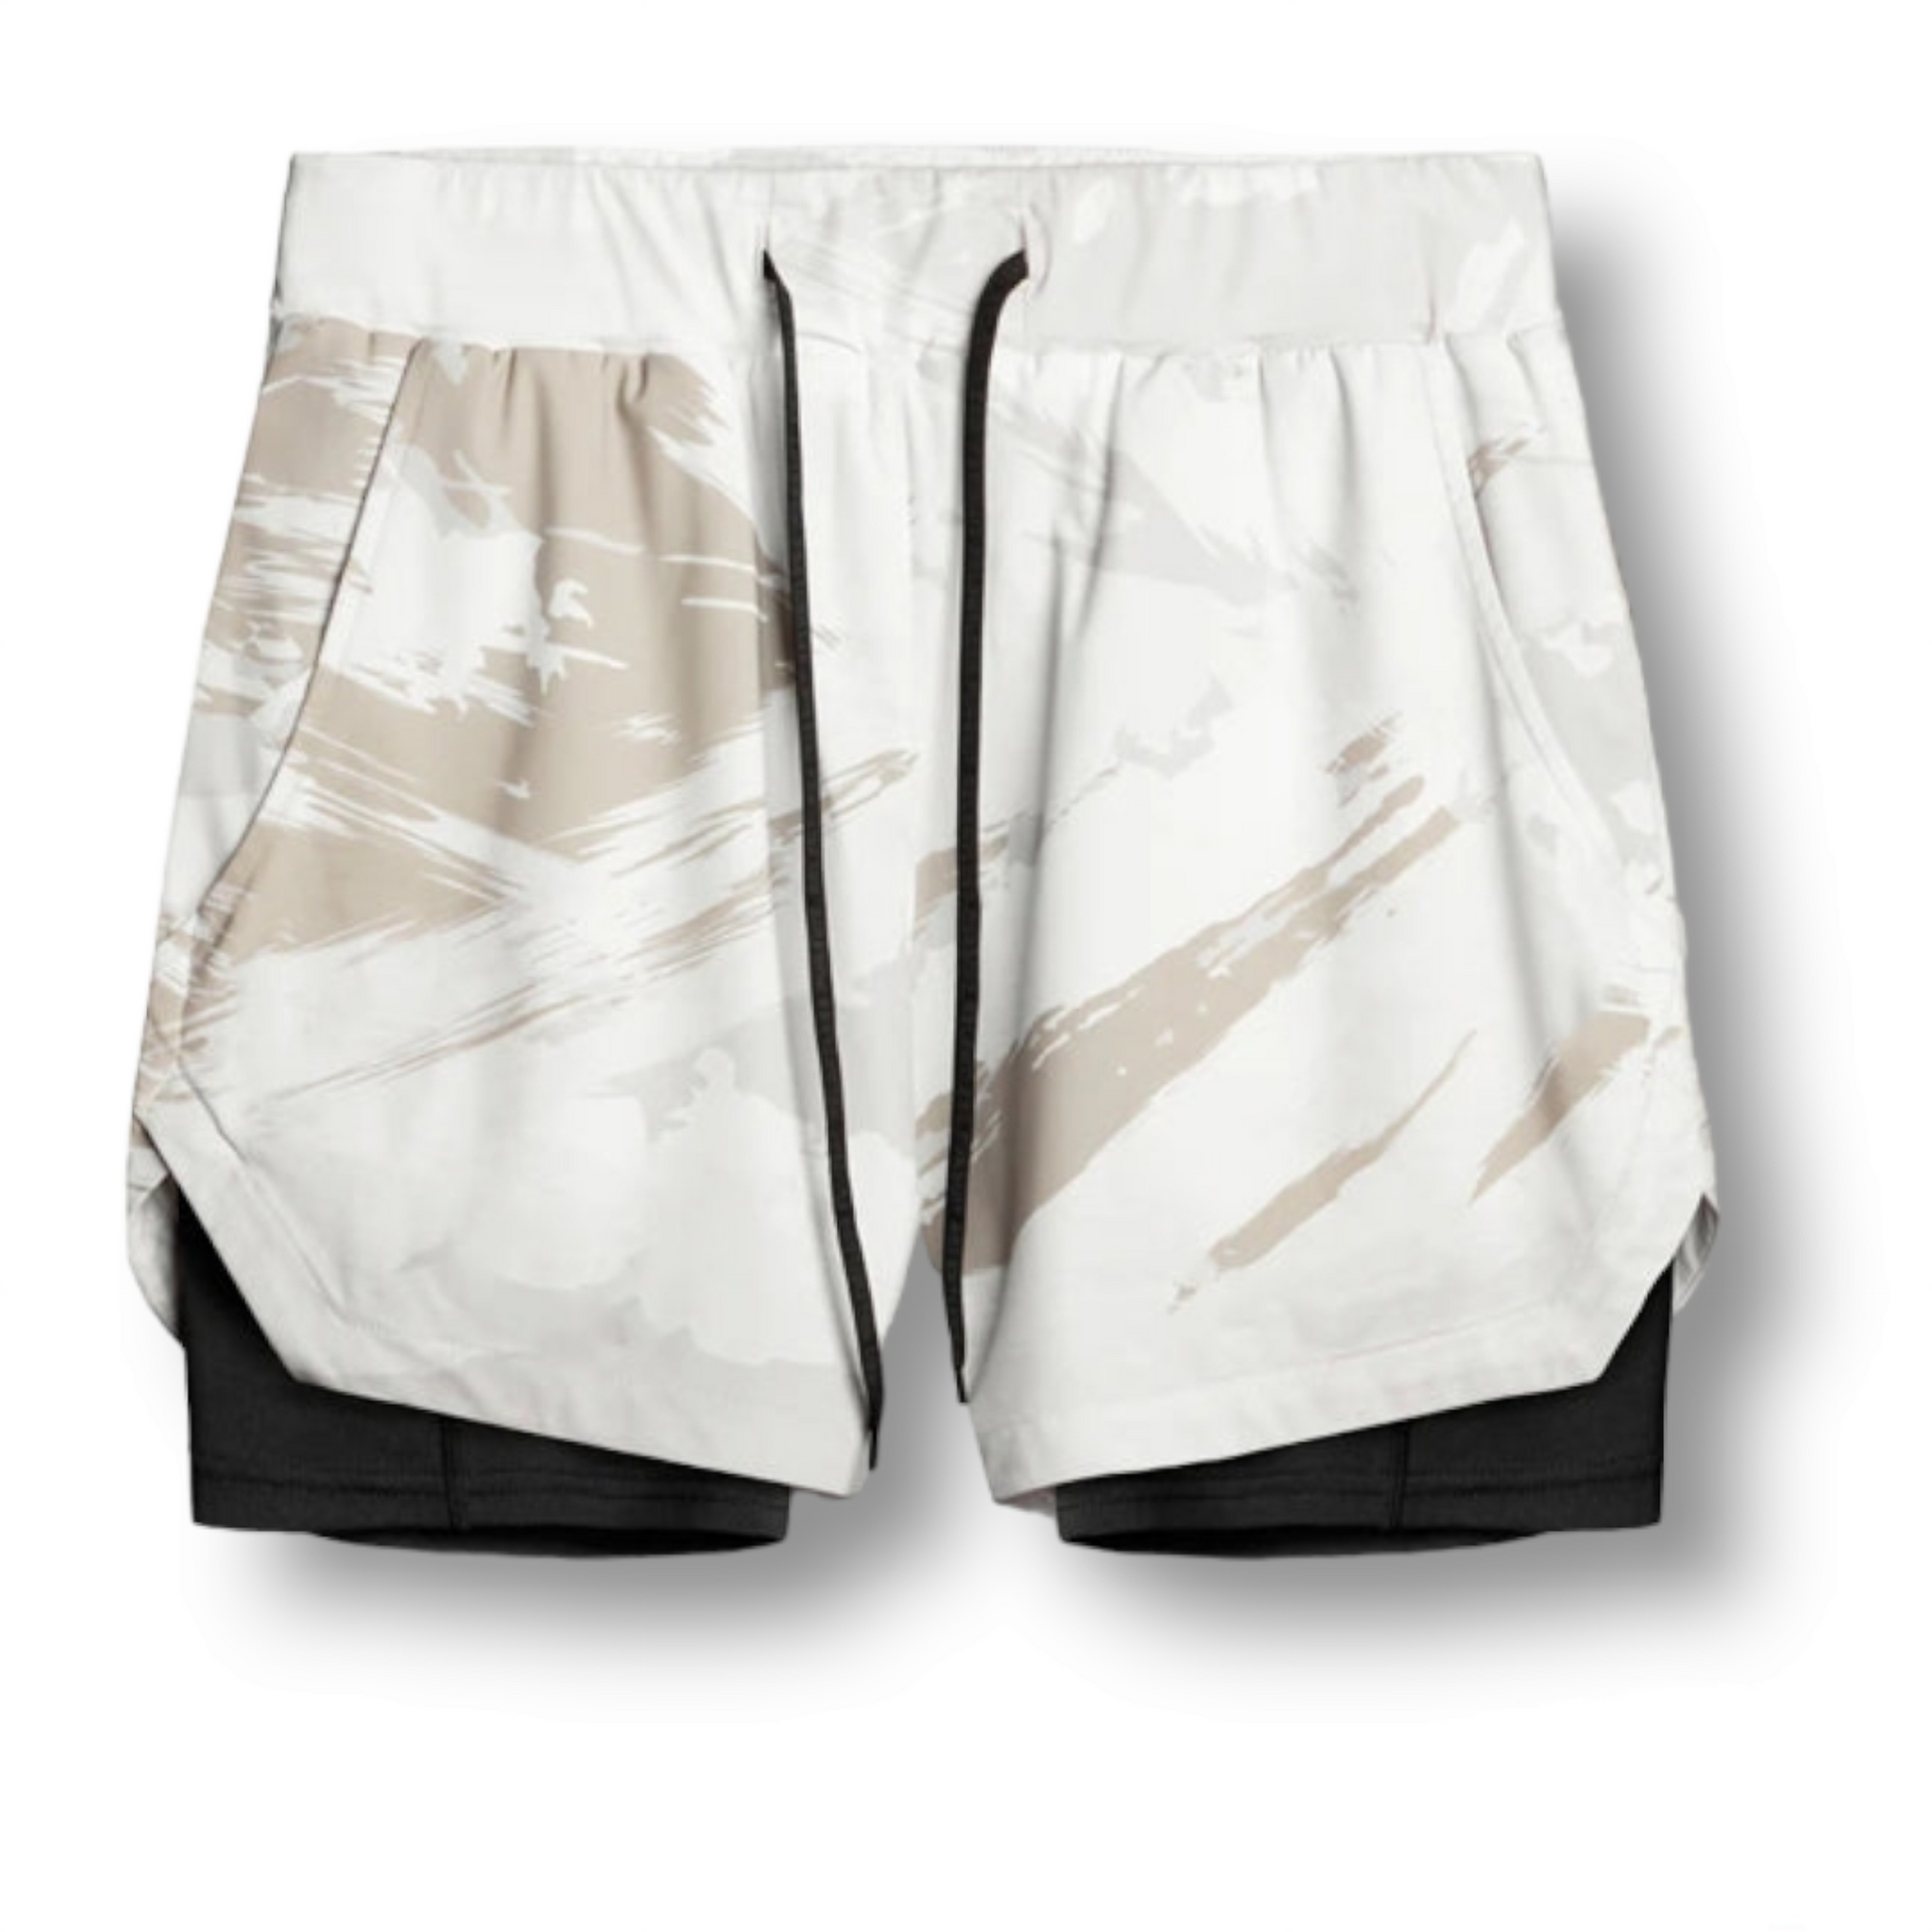 a pair of white camoflage elijah gym shorts with liner underneath on a white background